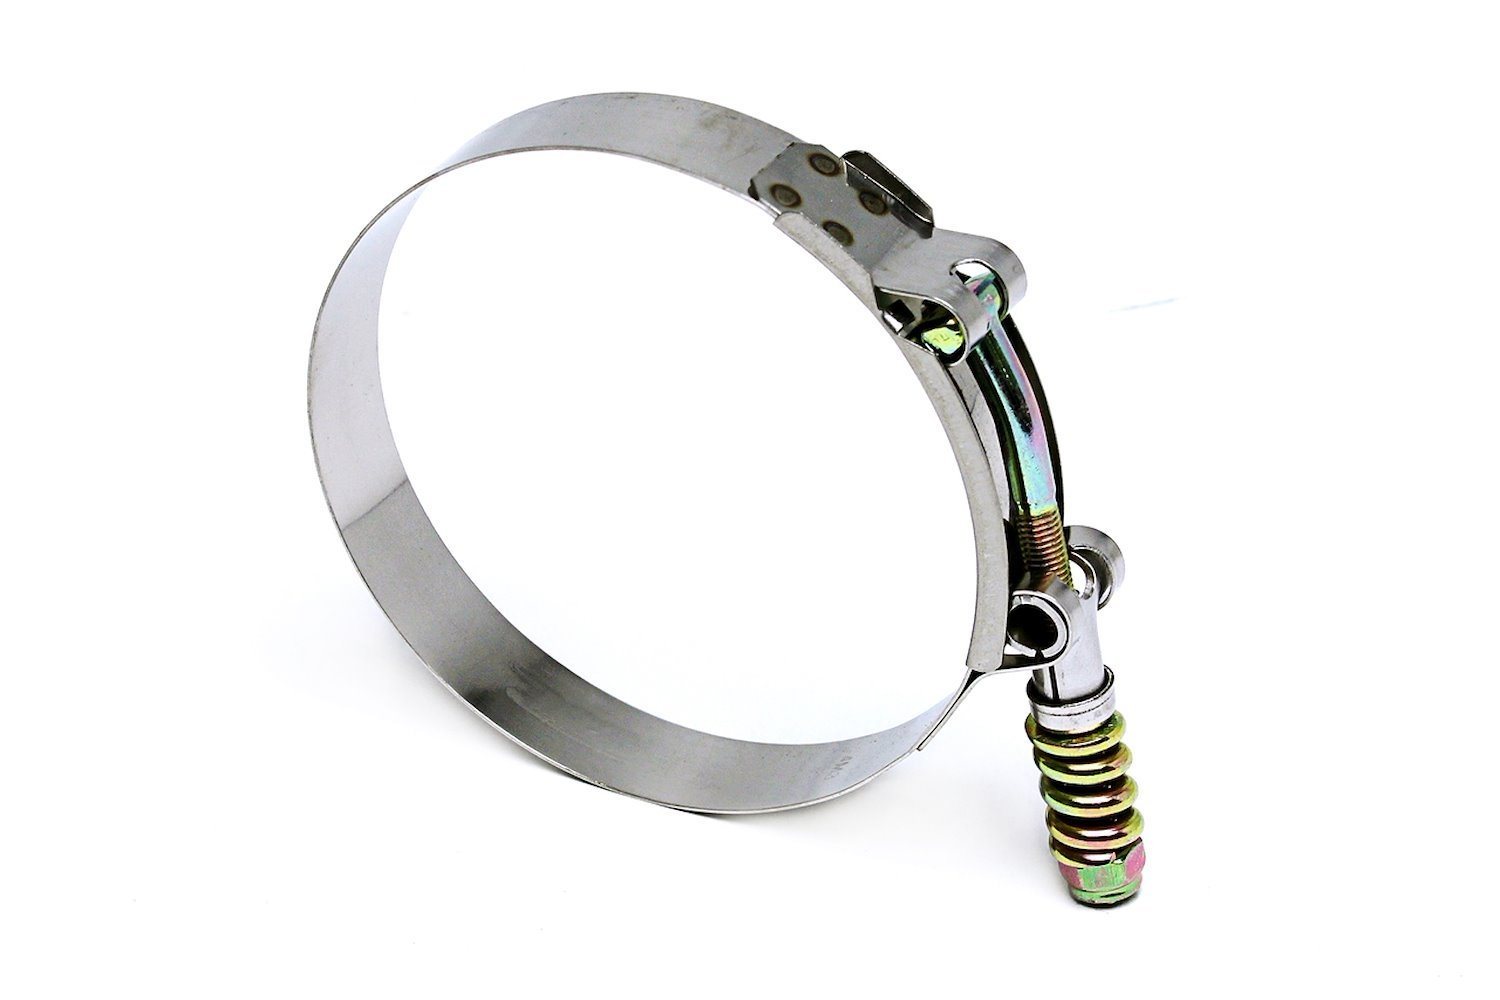 SLTC-475 Stainless Steel Spring Loaded T-Bolt Hose Clamp, Size #124, Range: 4.77 in.-5.08 in.